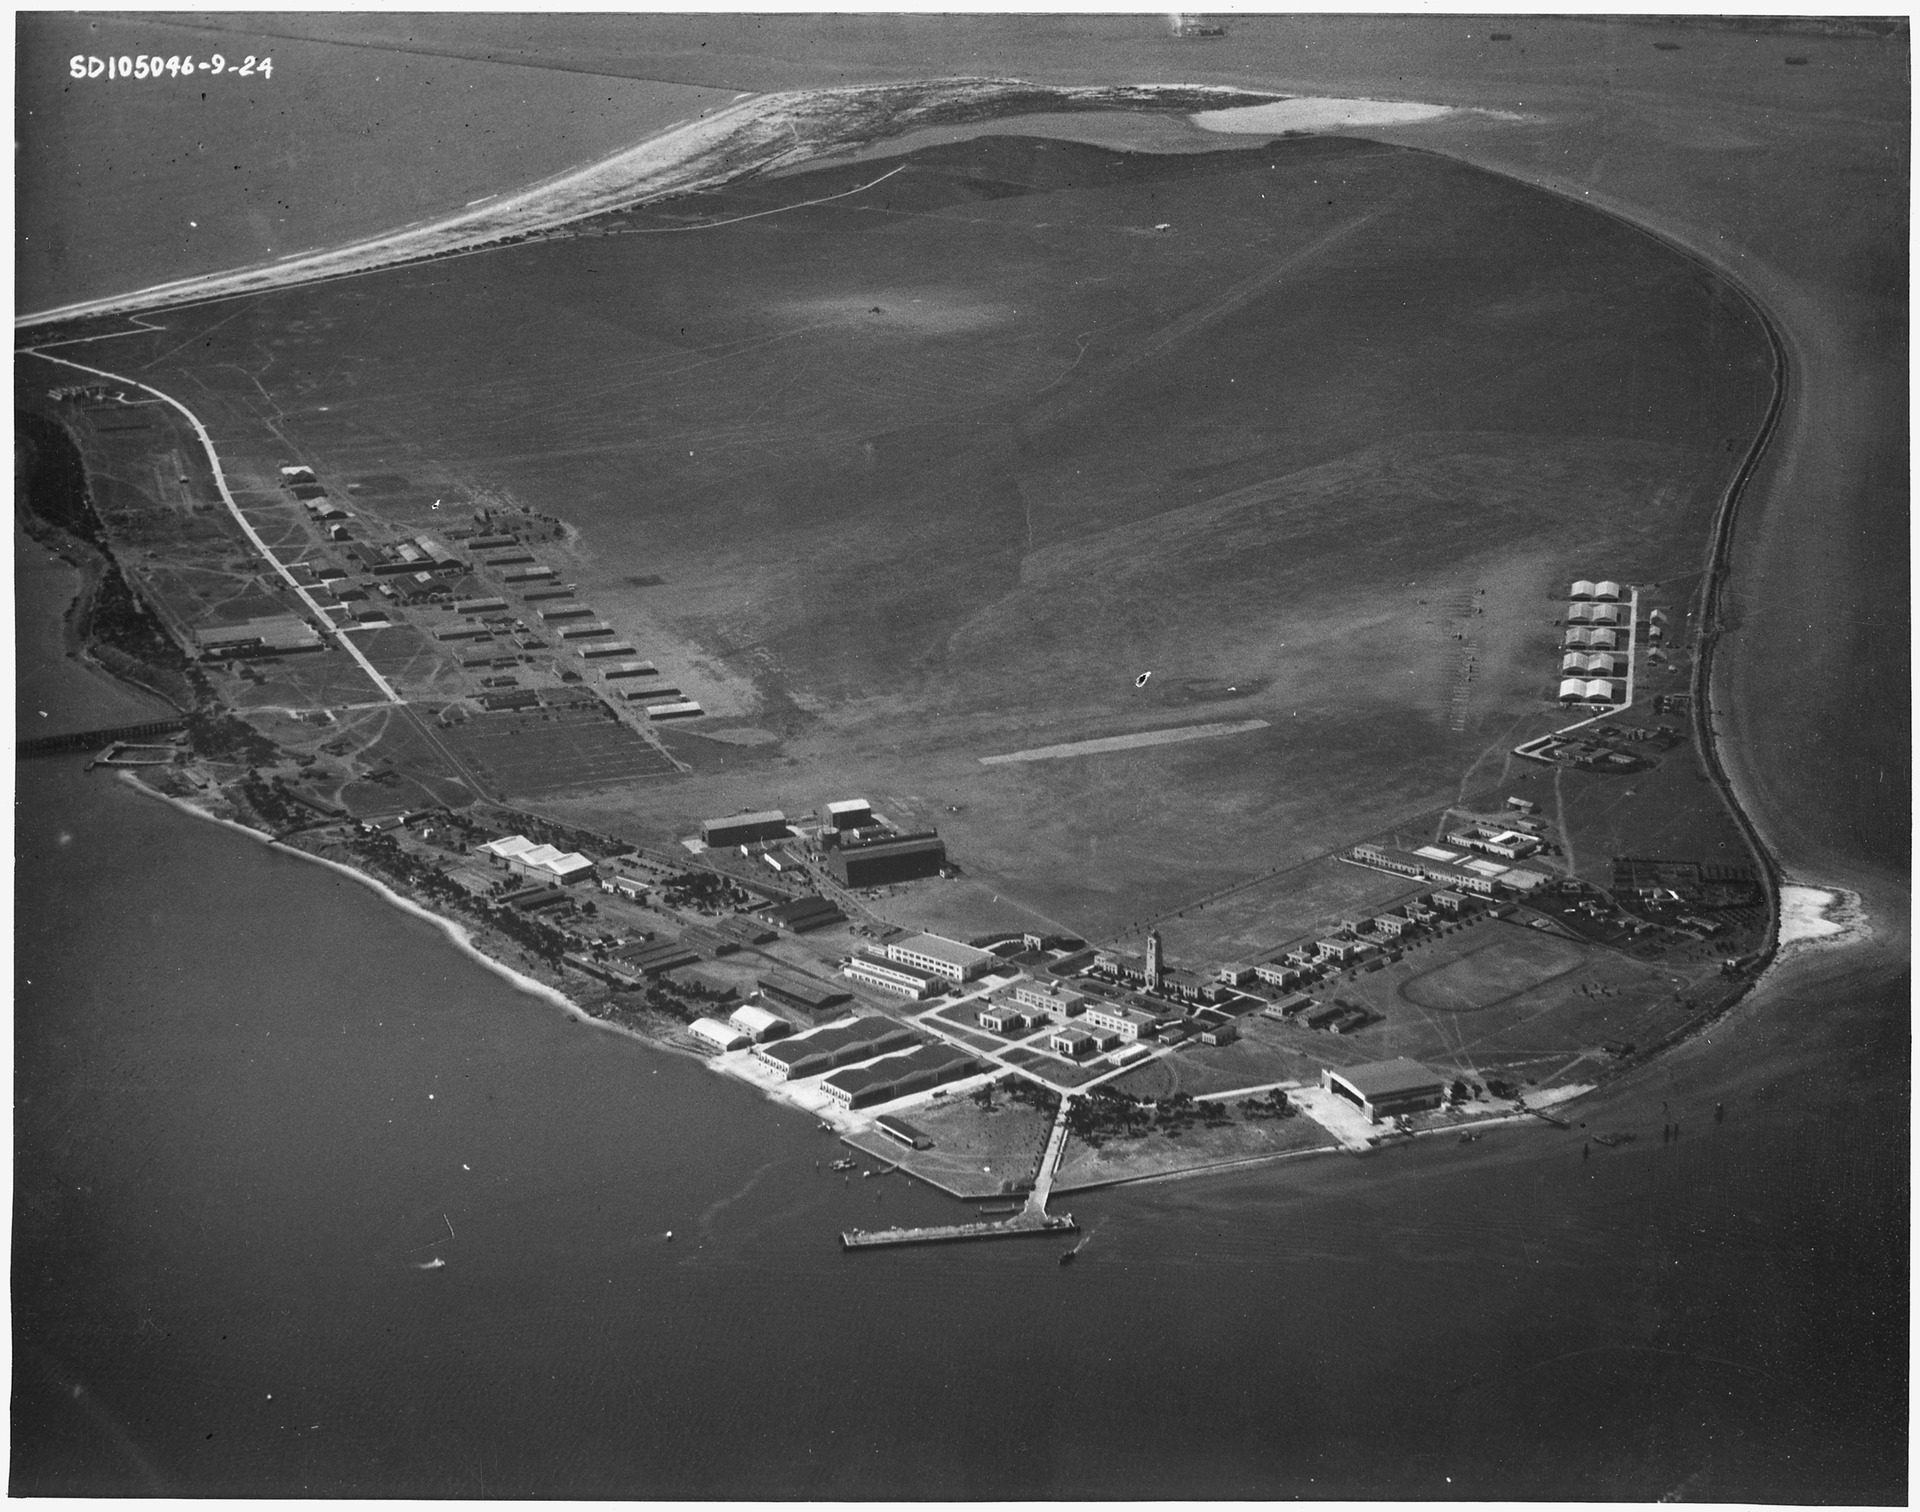 lossy-page1-1920px-Naval_Air_Station%2C_Aerial_View_Showing_Development%2C_September_10%2C_1924_-_Height_3500_feet_-_NARA_-_295437.tif.jpg